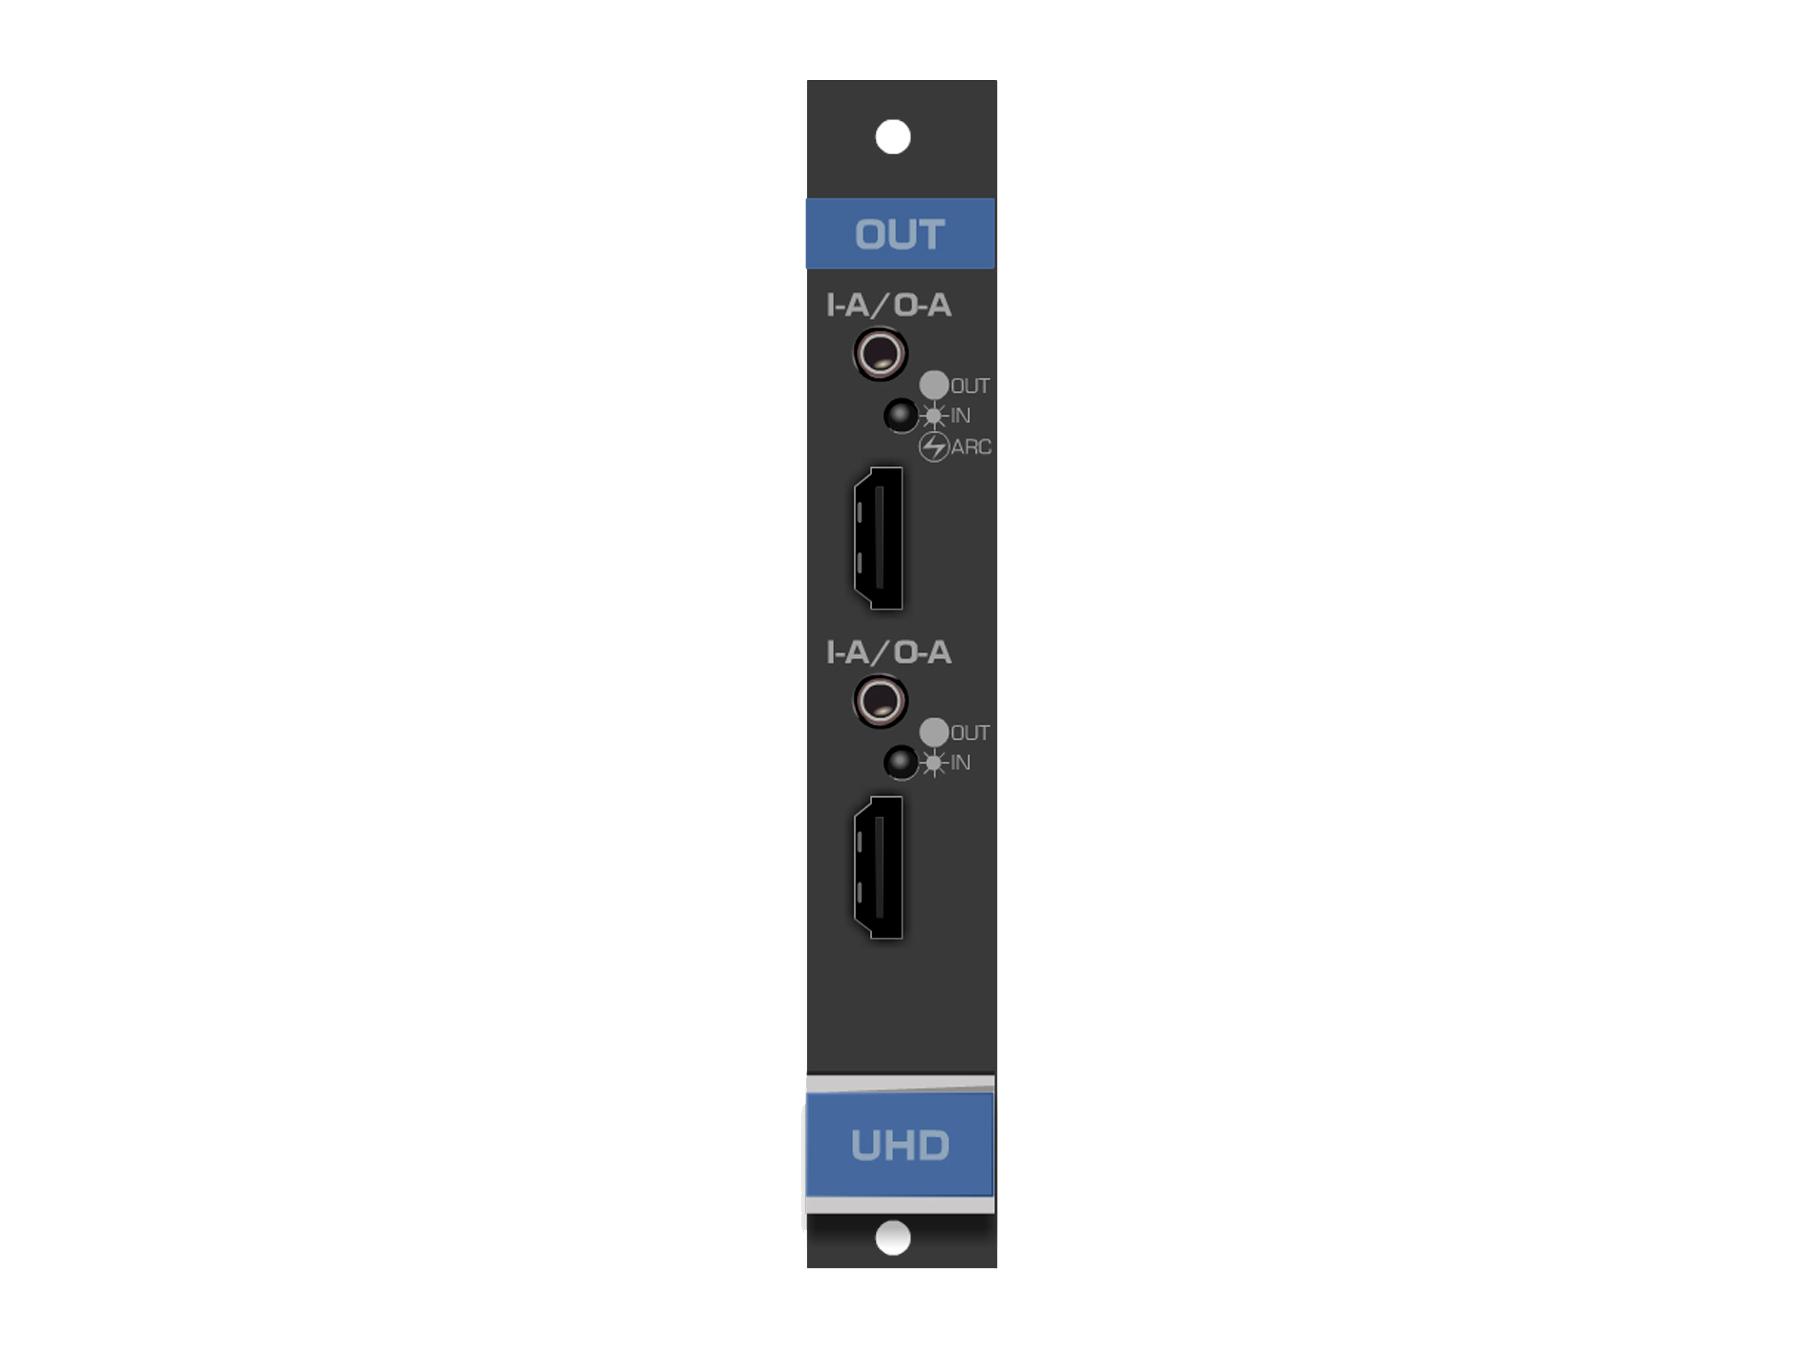 UHDA-OUT2-F16 2-Output 4K HDMI with Selectable Analog Audio Card for VS-1616D Matrix Switcher (F-16) by Kramer